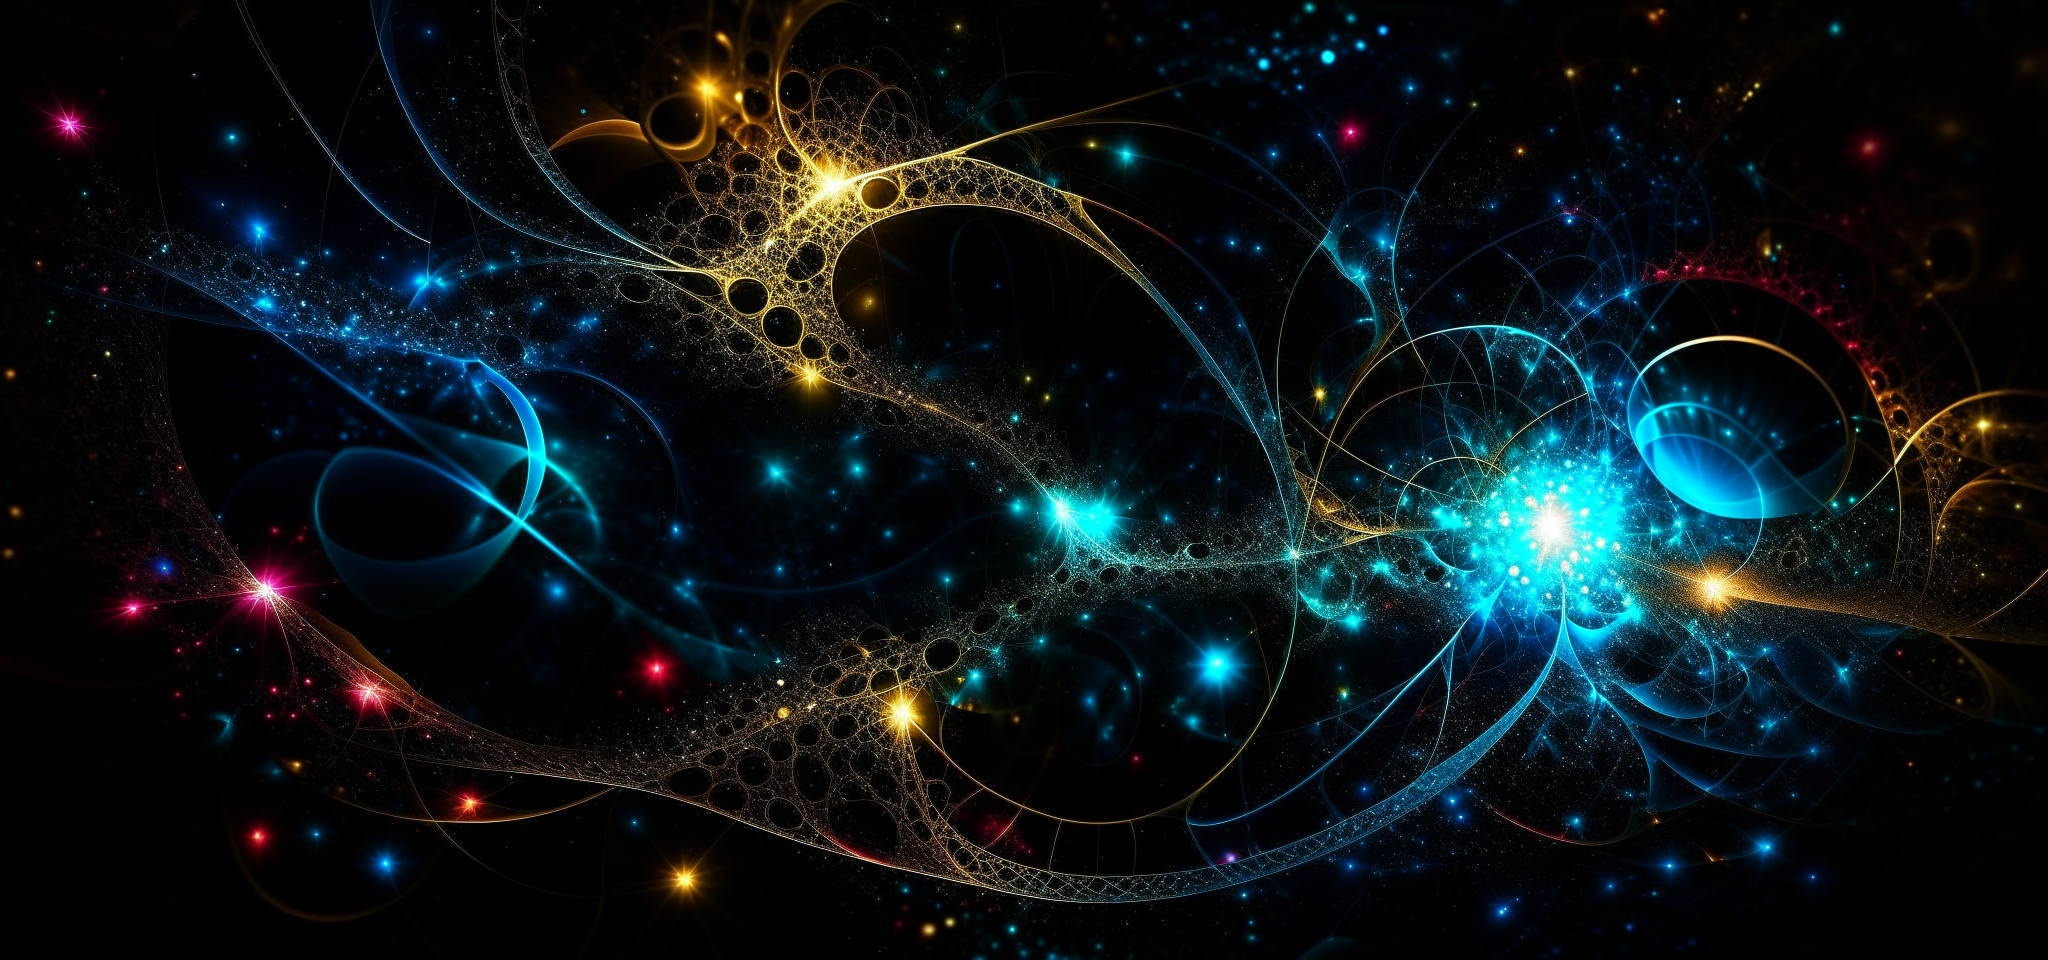 post background, dark theme, fractals, abstract, space, 